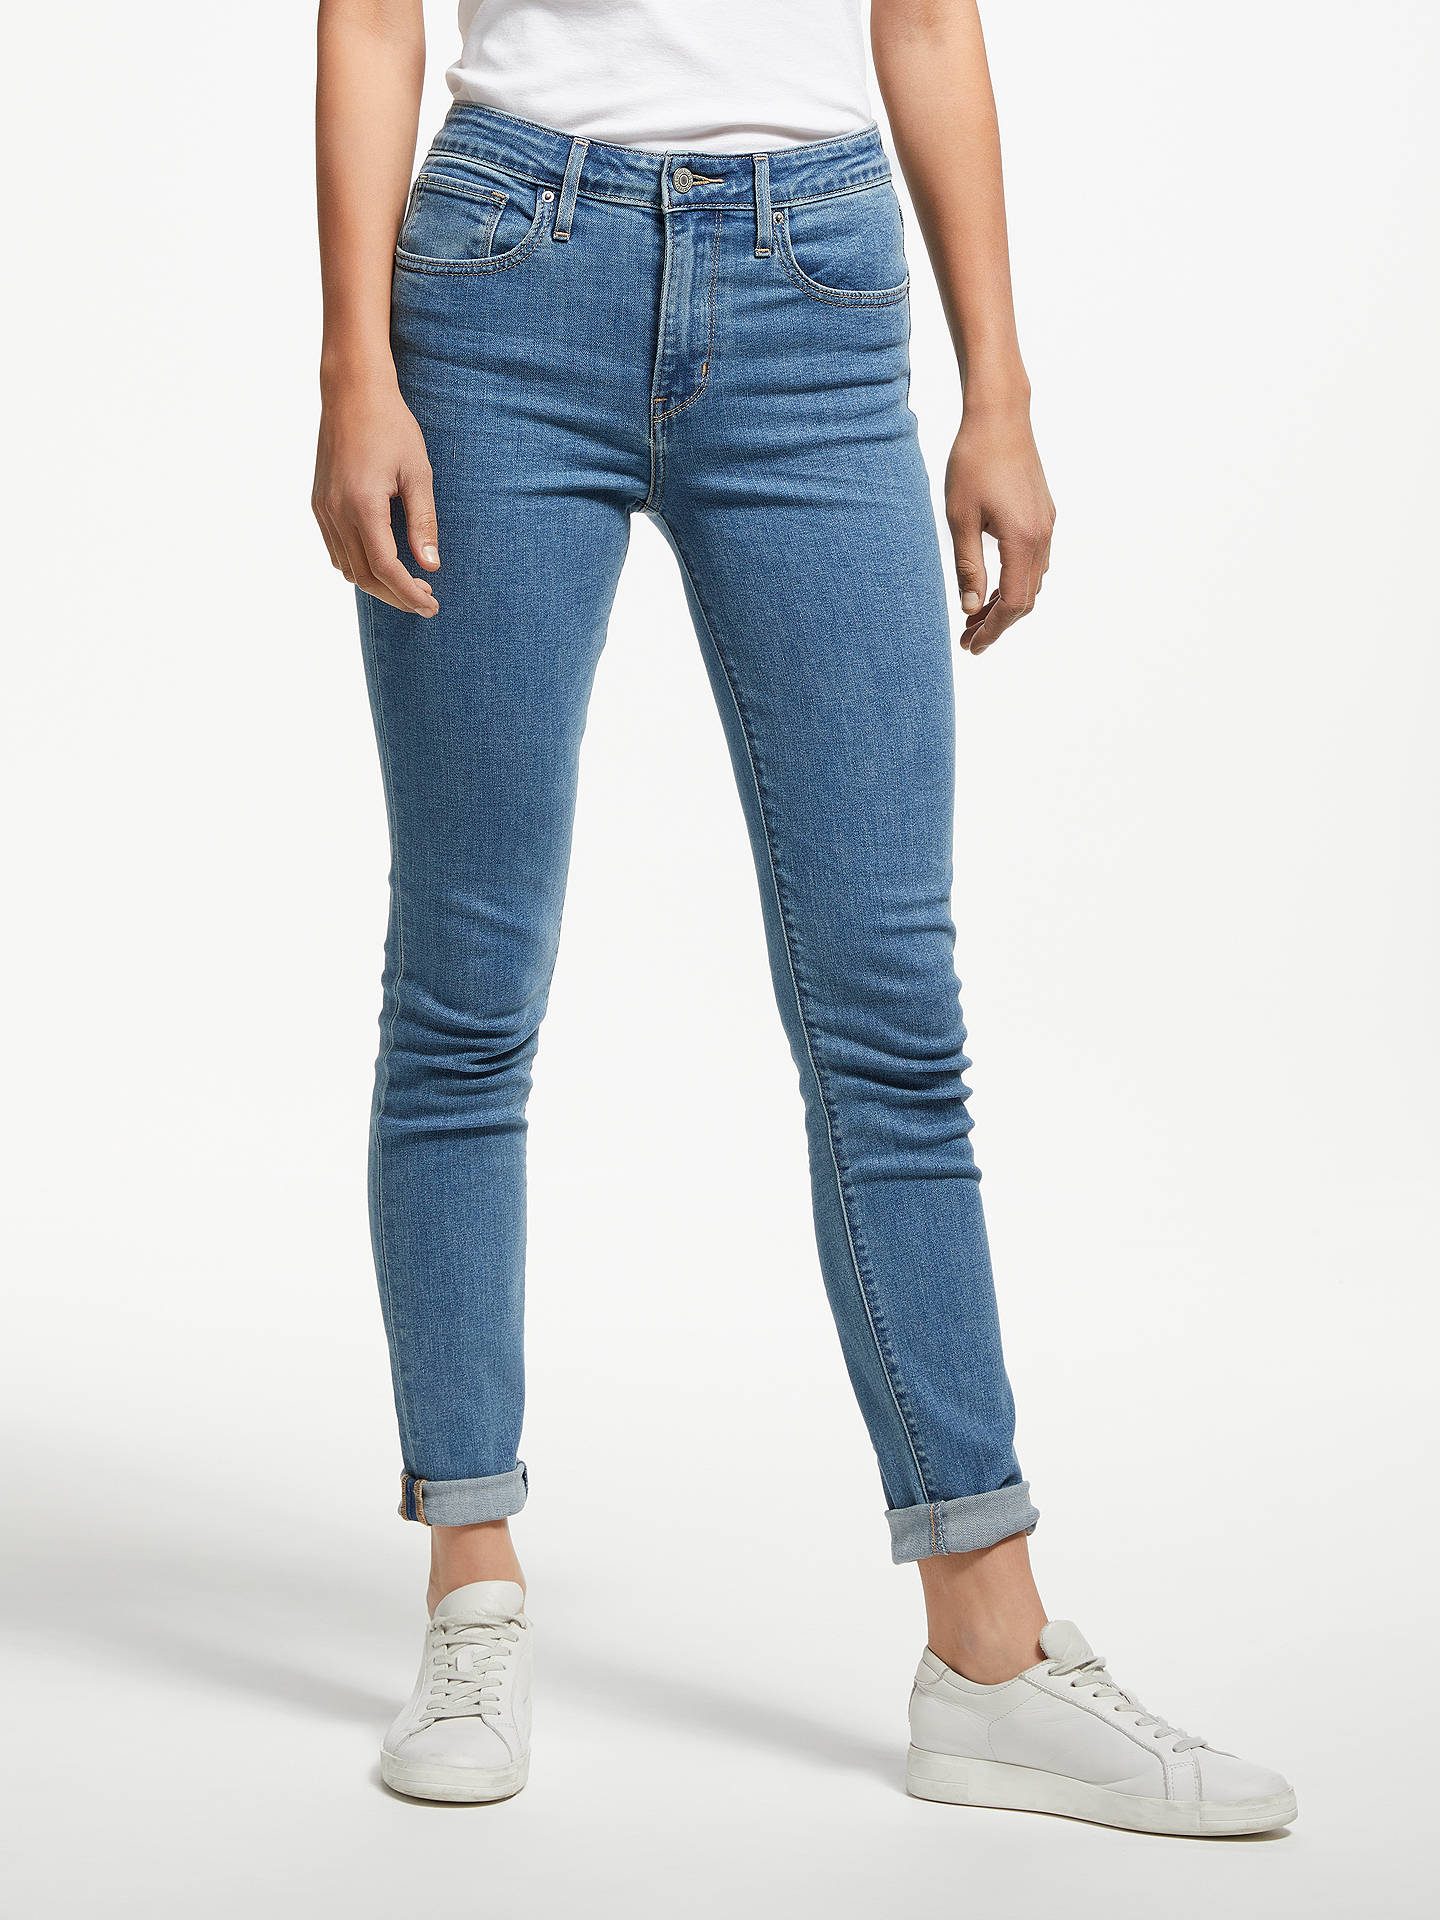 Levi's 721 High Rise Skinny Jeans at John Lewis & Partners